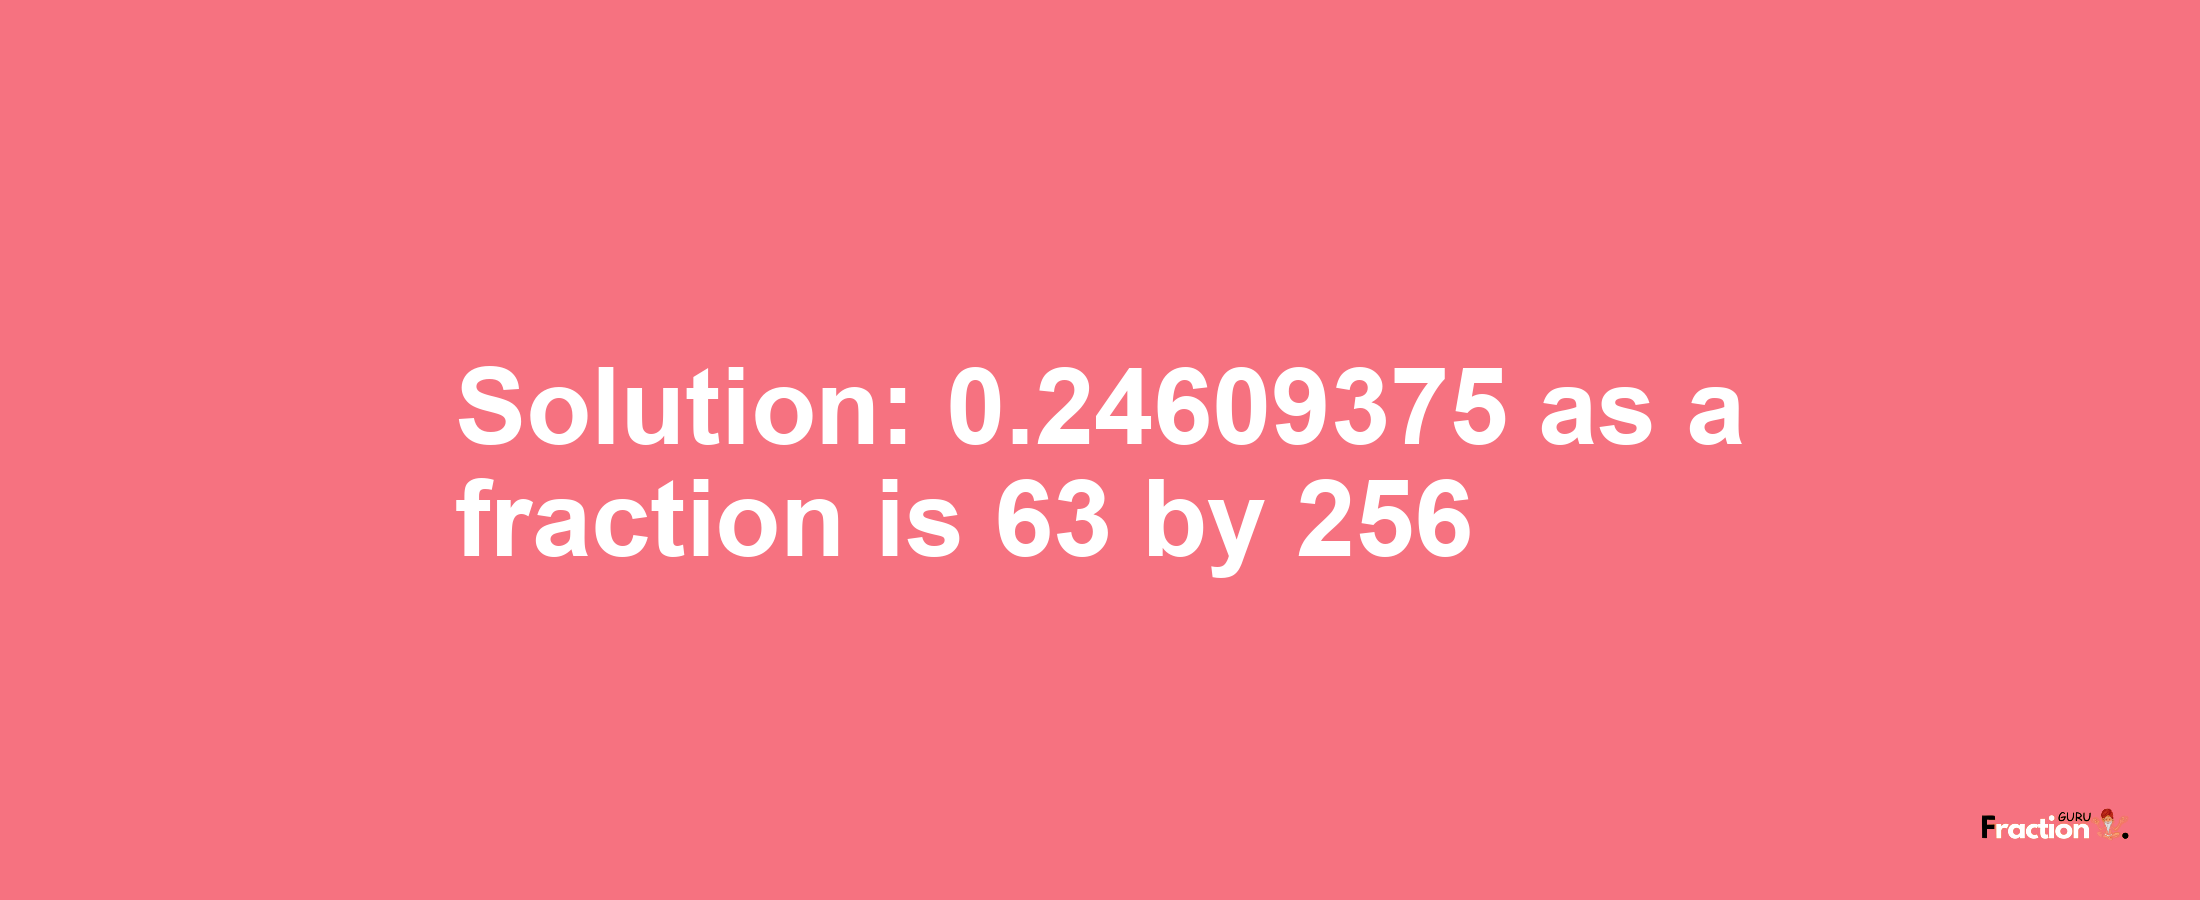 Solution:0.24609375 as a fraction is 63/256